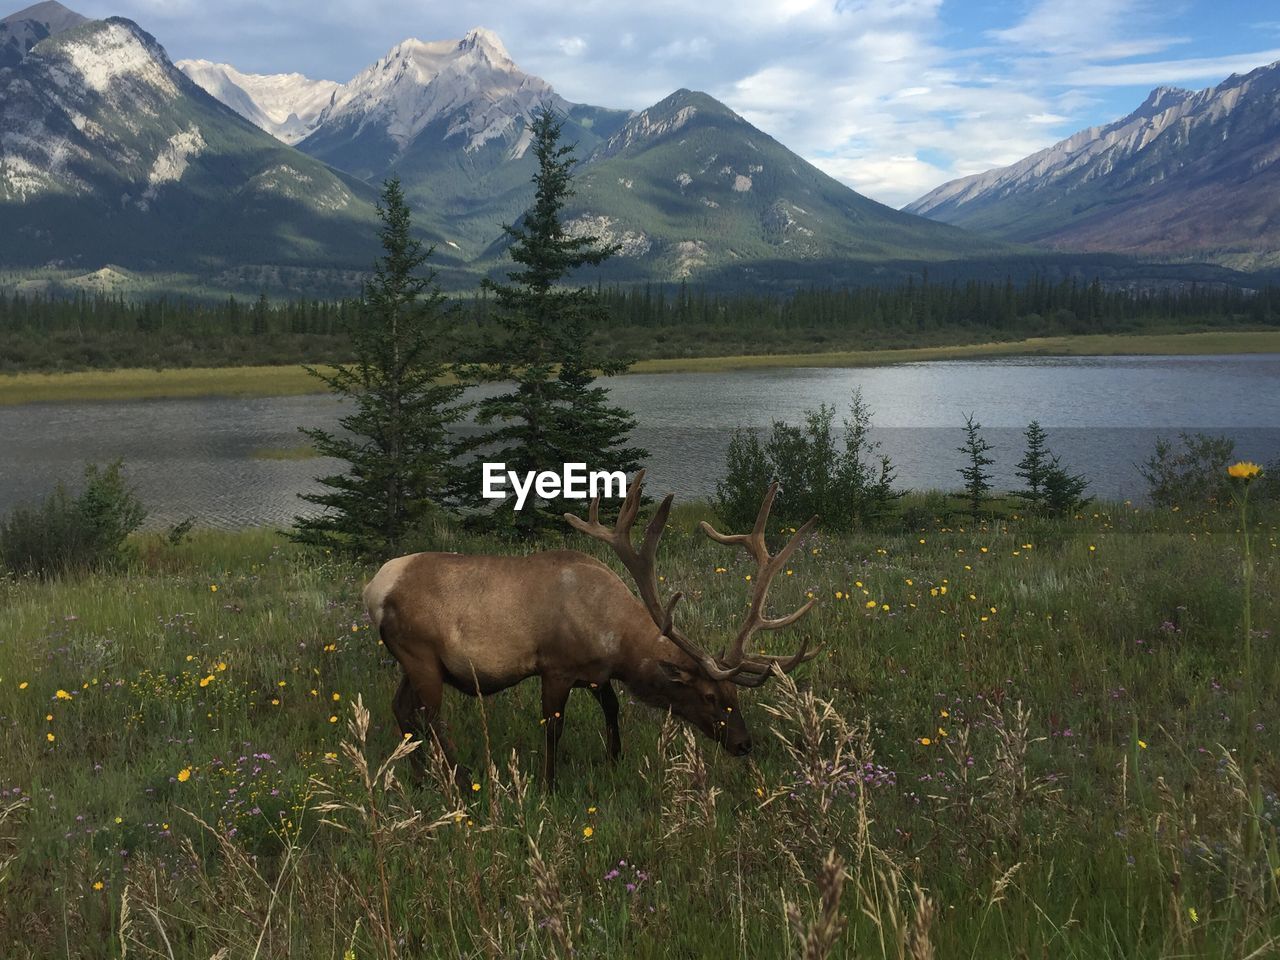 Elk grazing on grassy field by river against mountains